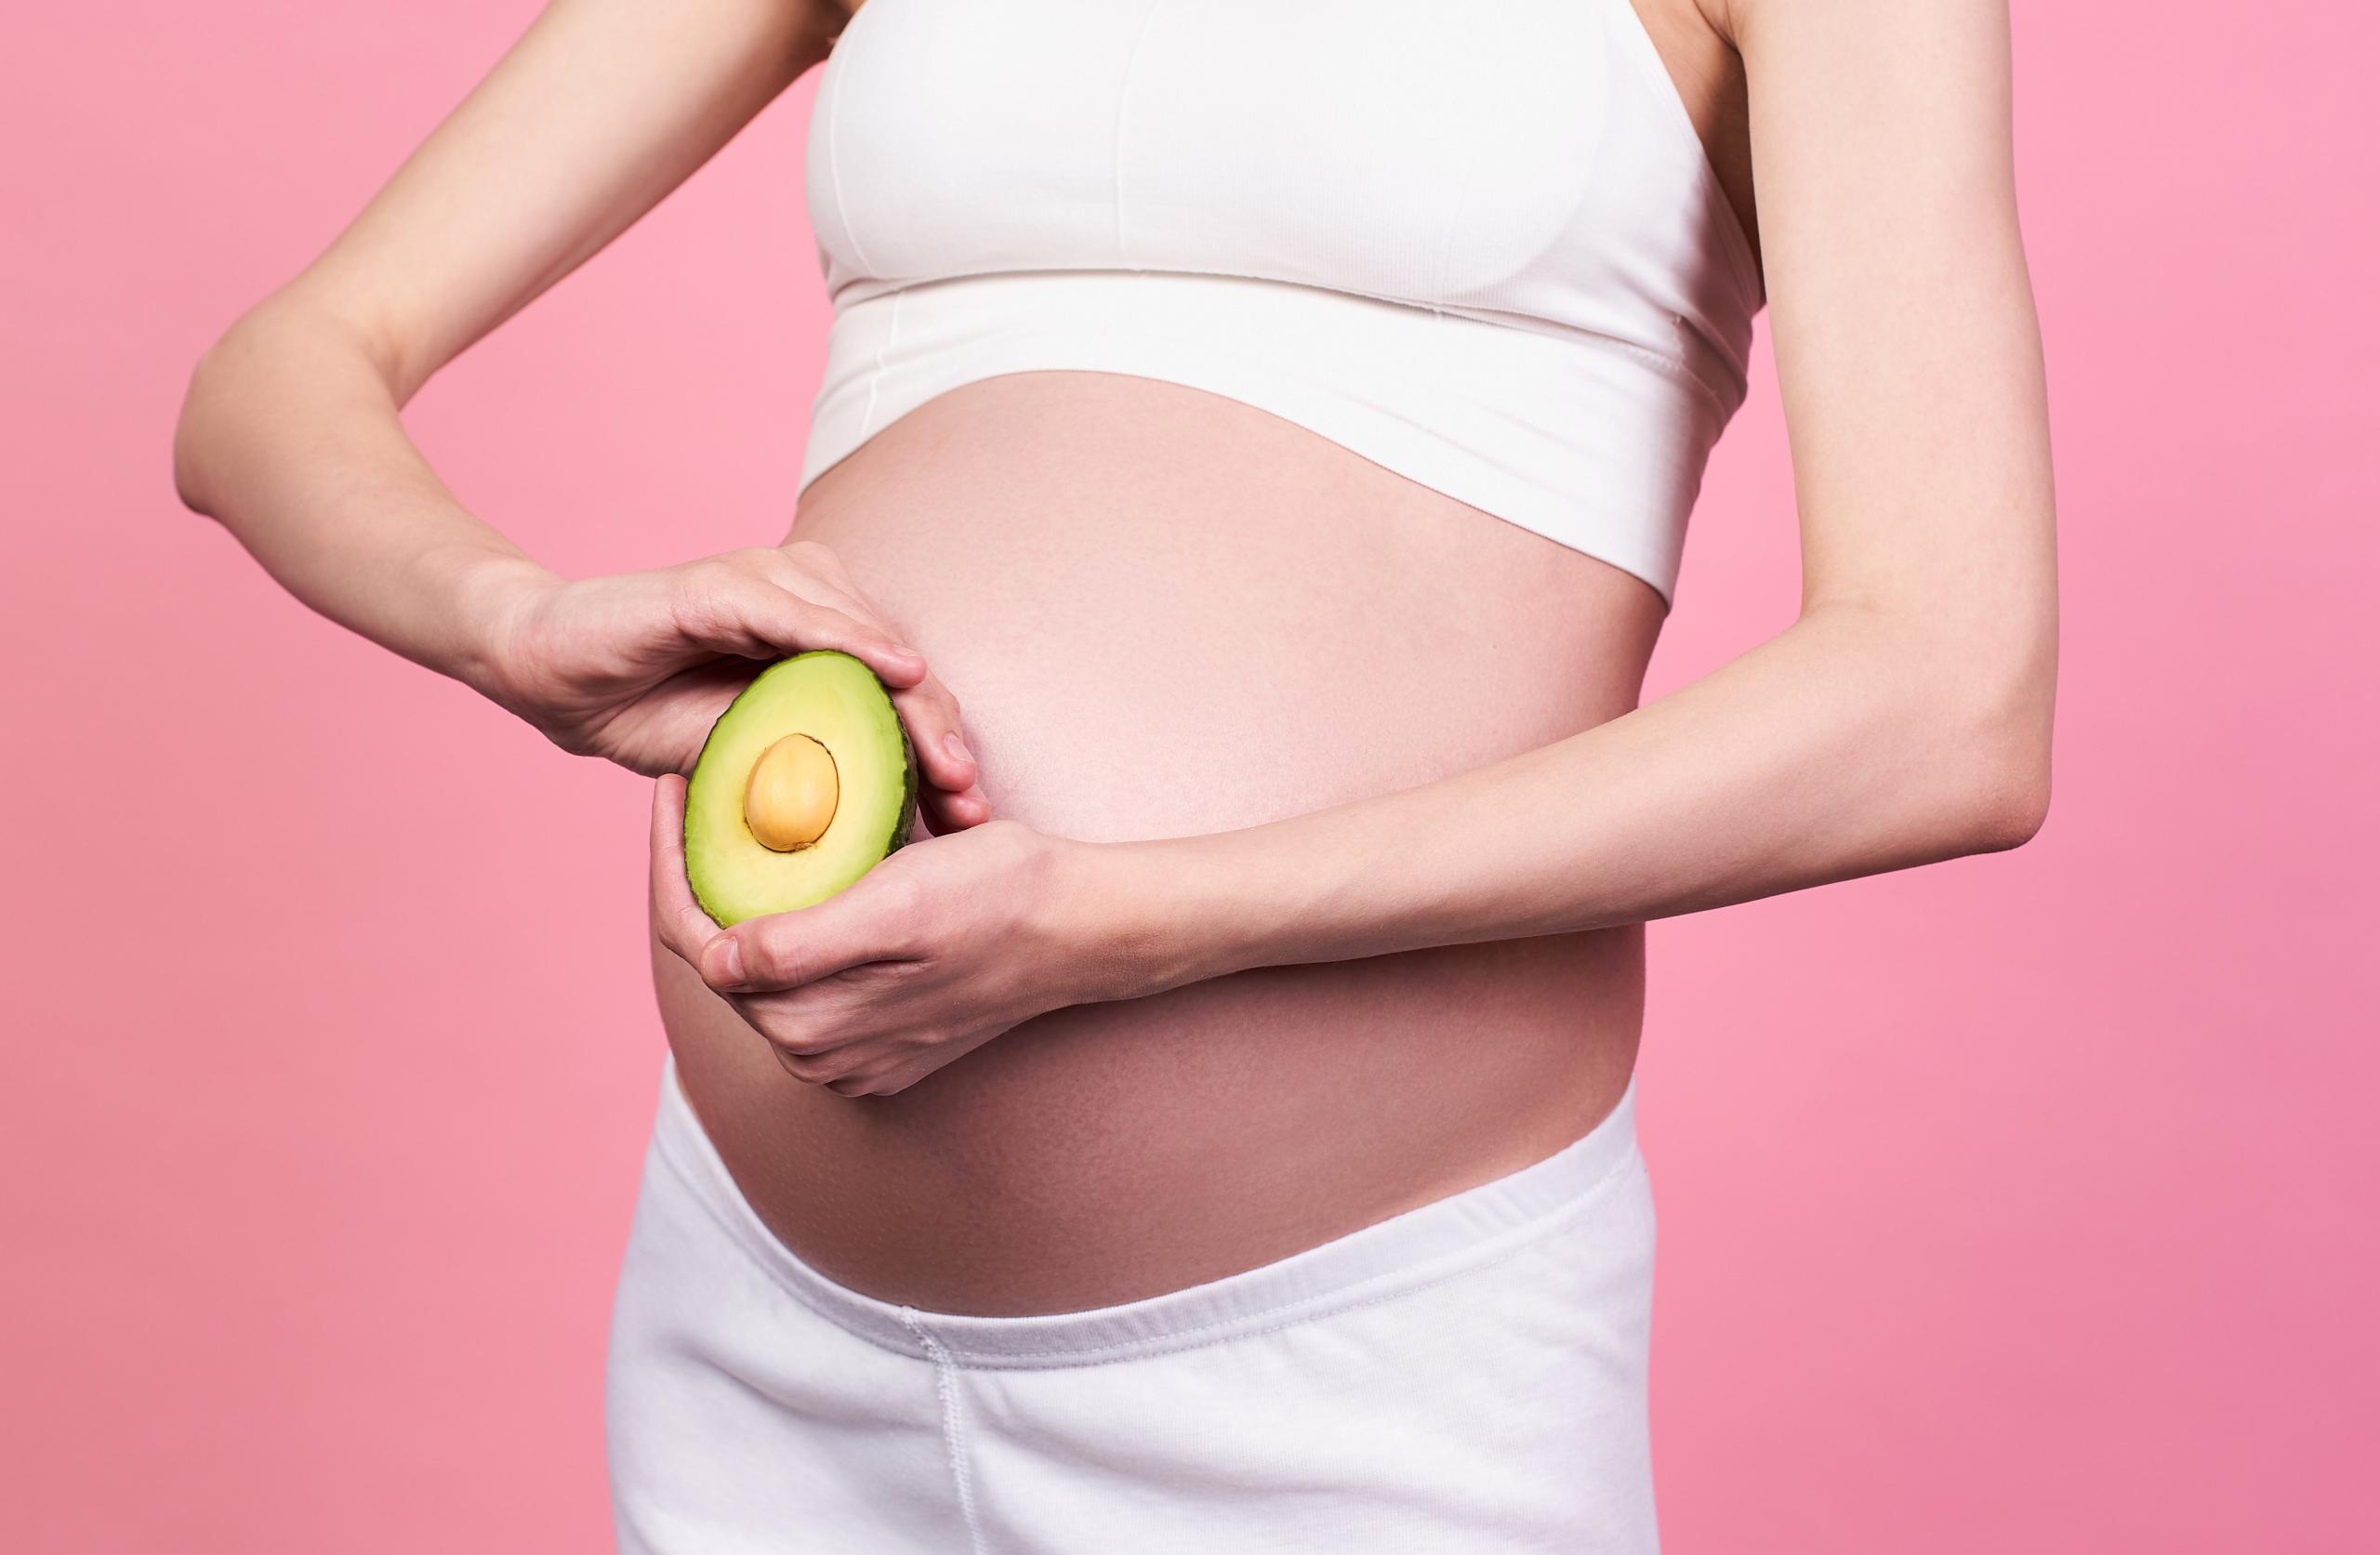 Close-up, profile of a young Caucasian woman, with beautiful healthy skin, in a white top, holding a half avocado at belly level with two hands, on a pink background. Pregnancy and nutrition concept.